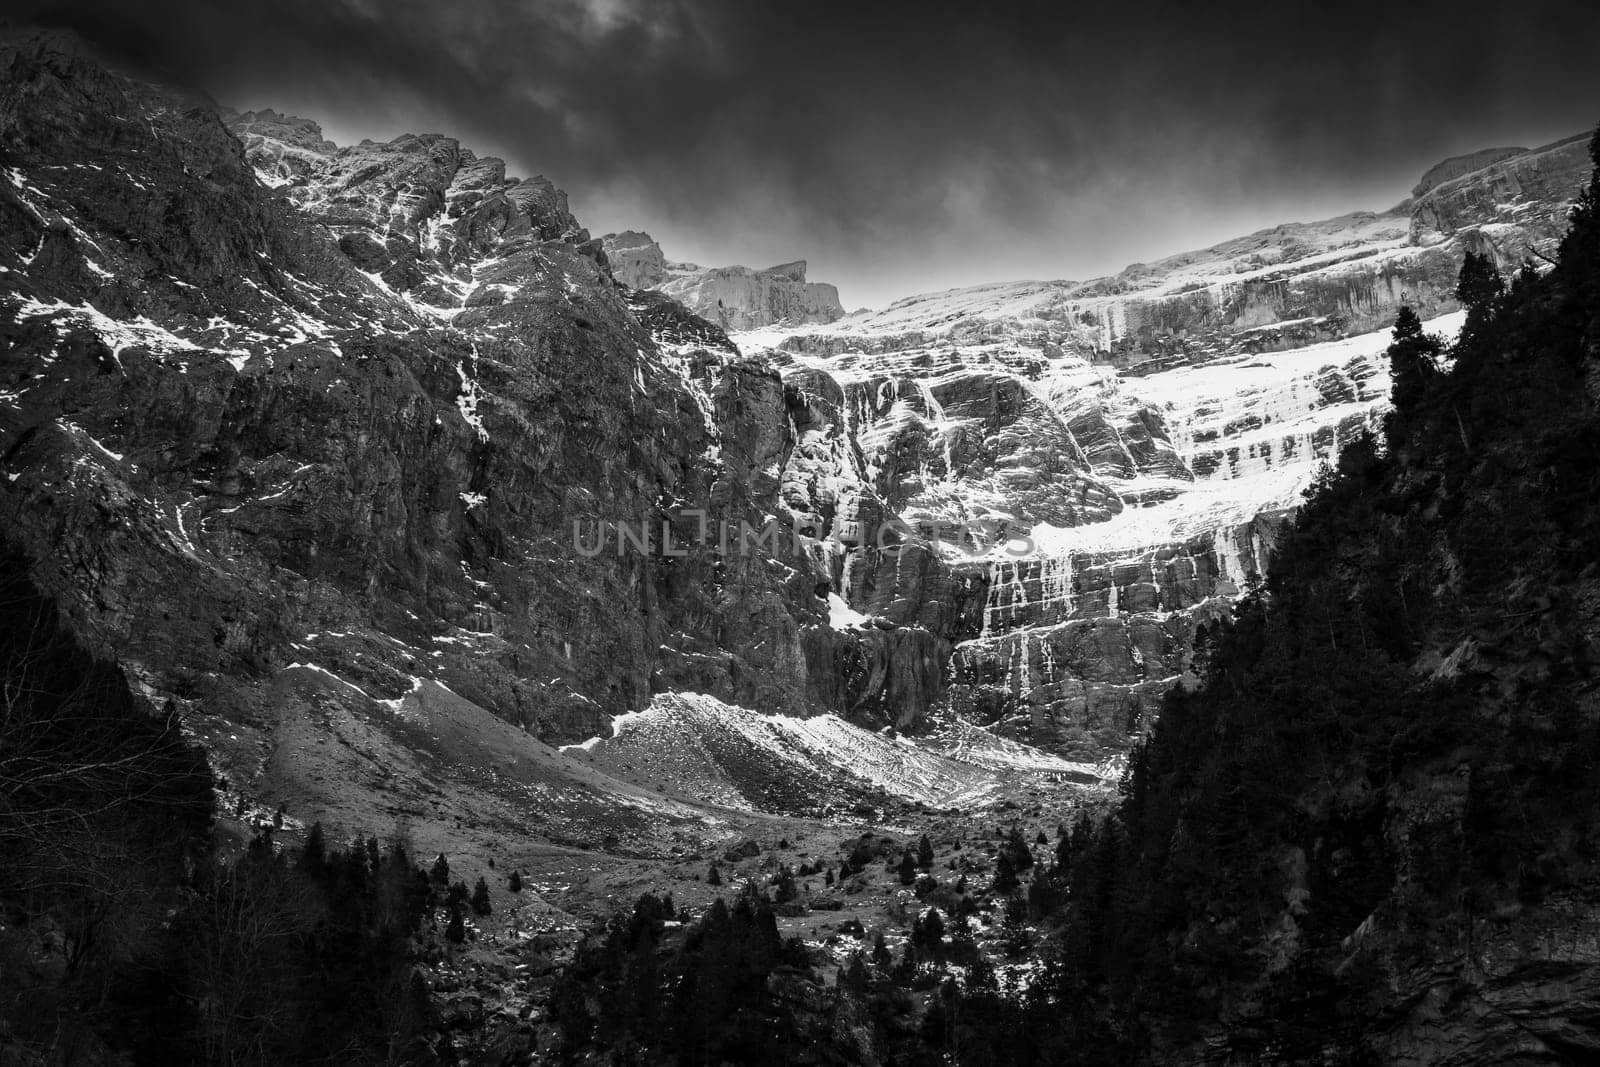 Sunset over the Pyrenees mountains, Circus of Gavarnie with snow by FreeProd